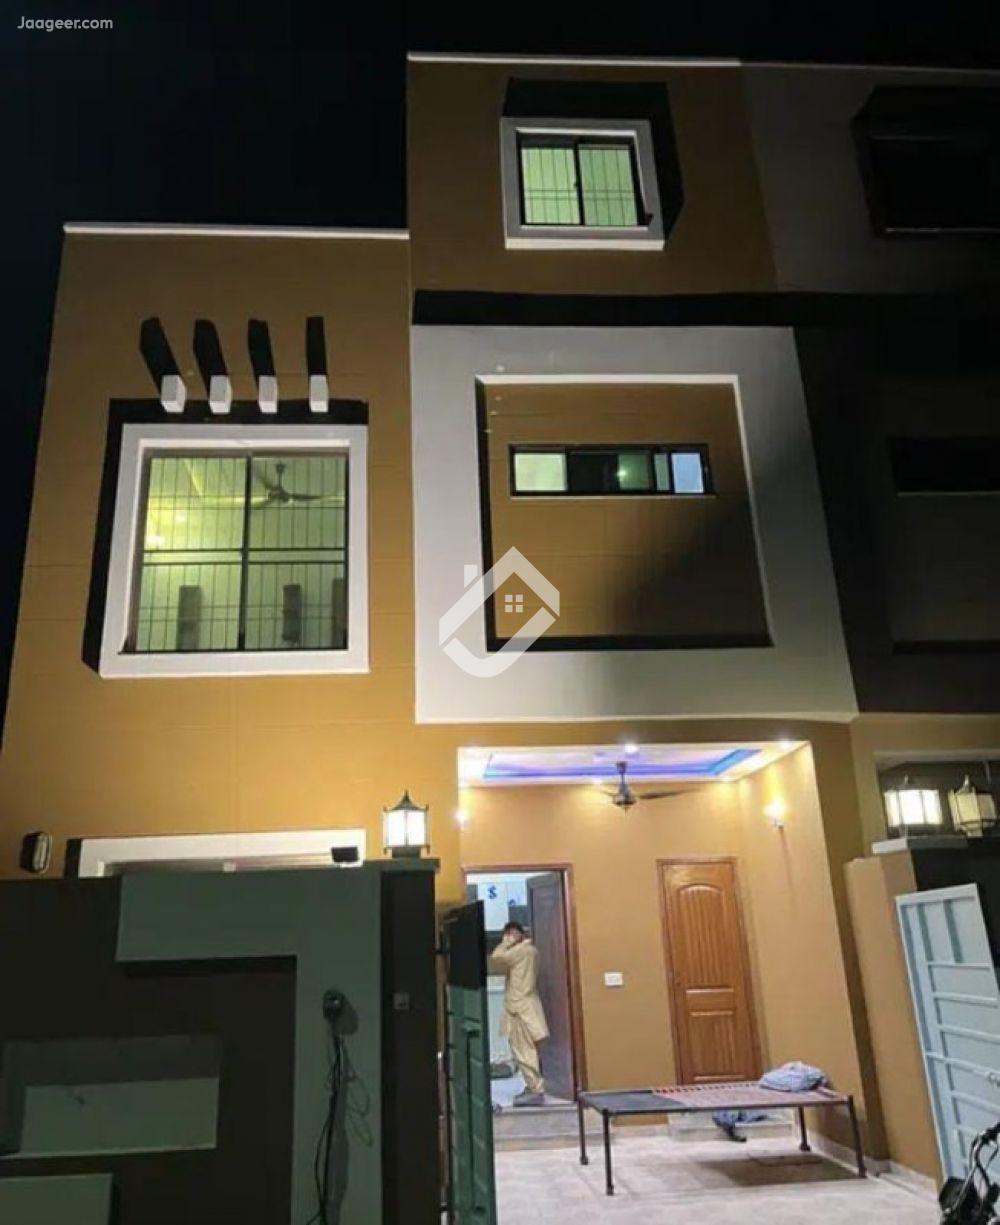 View  3 Marla Double Storey House For Sale In New Lahore City  in New Lahore City, Lahore